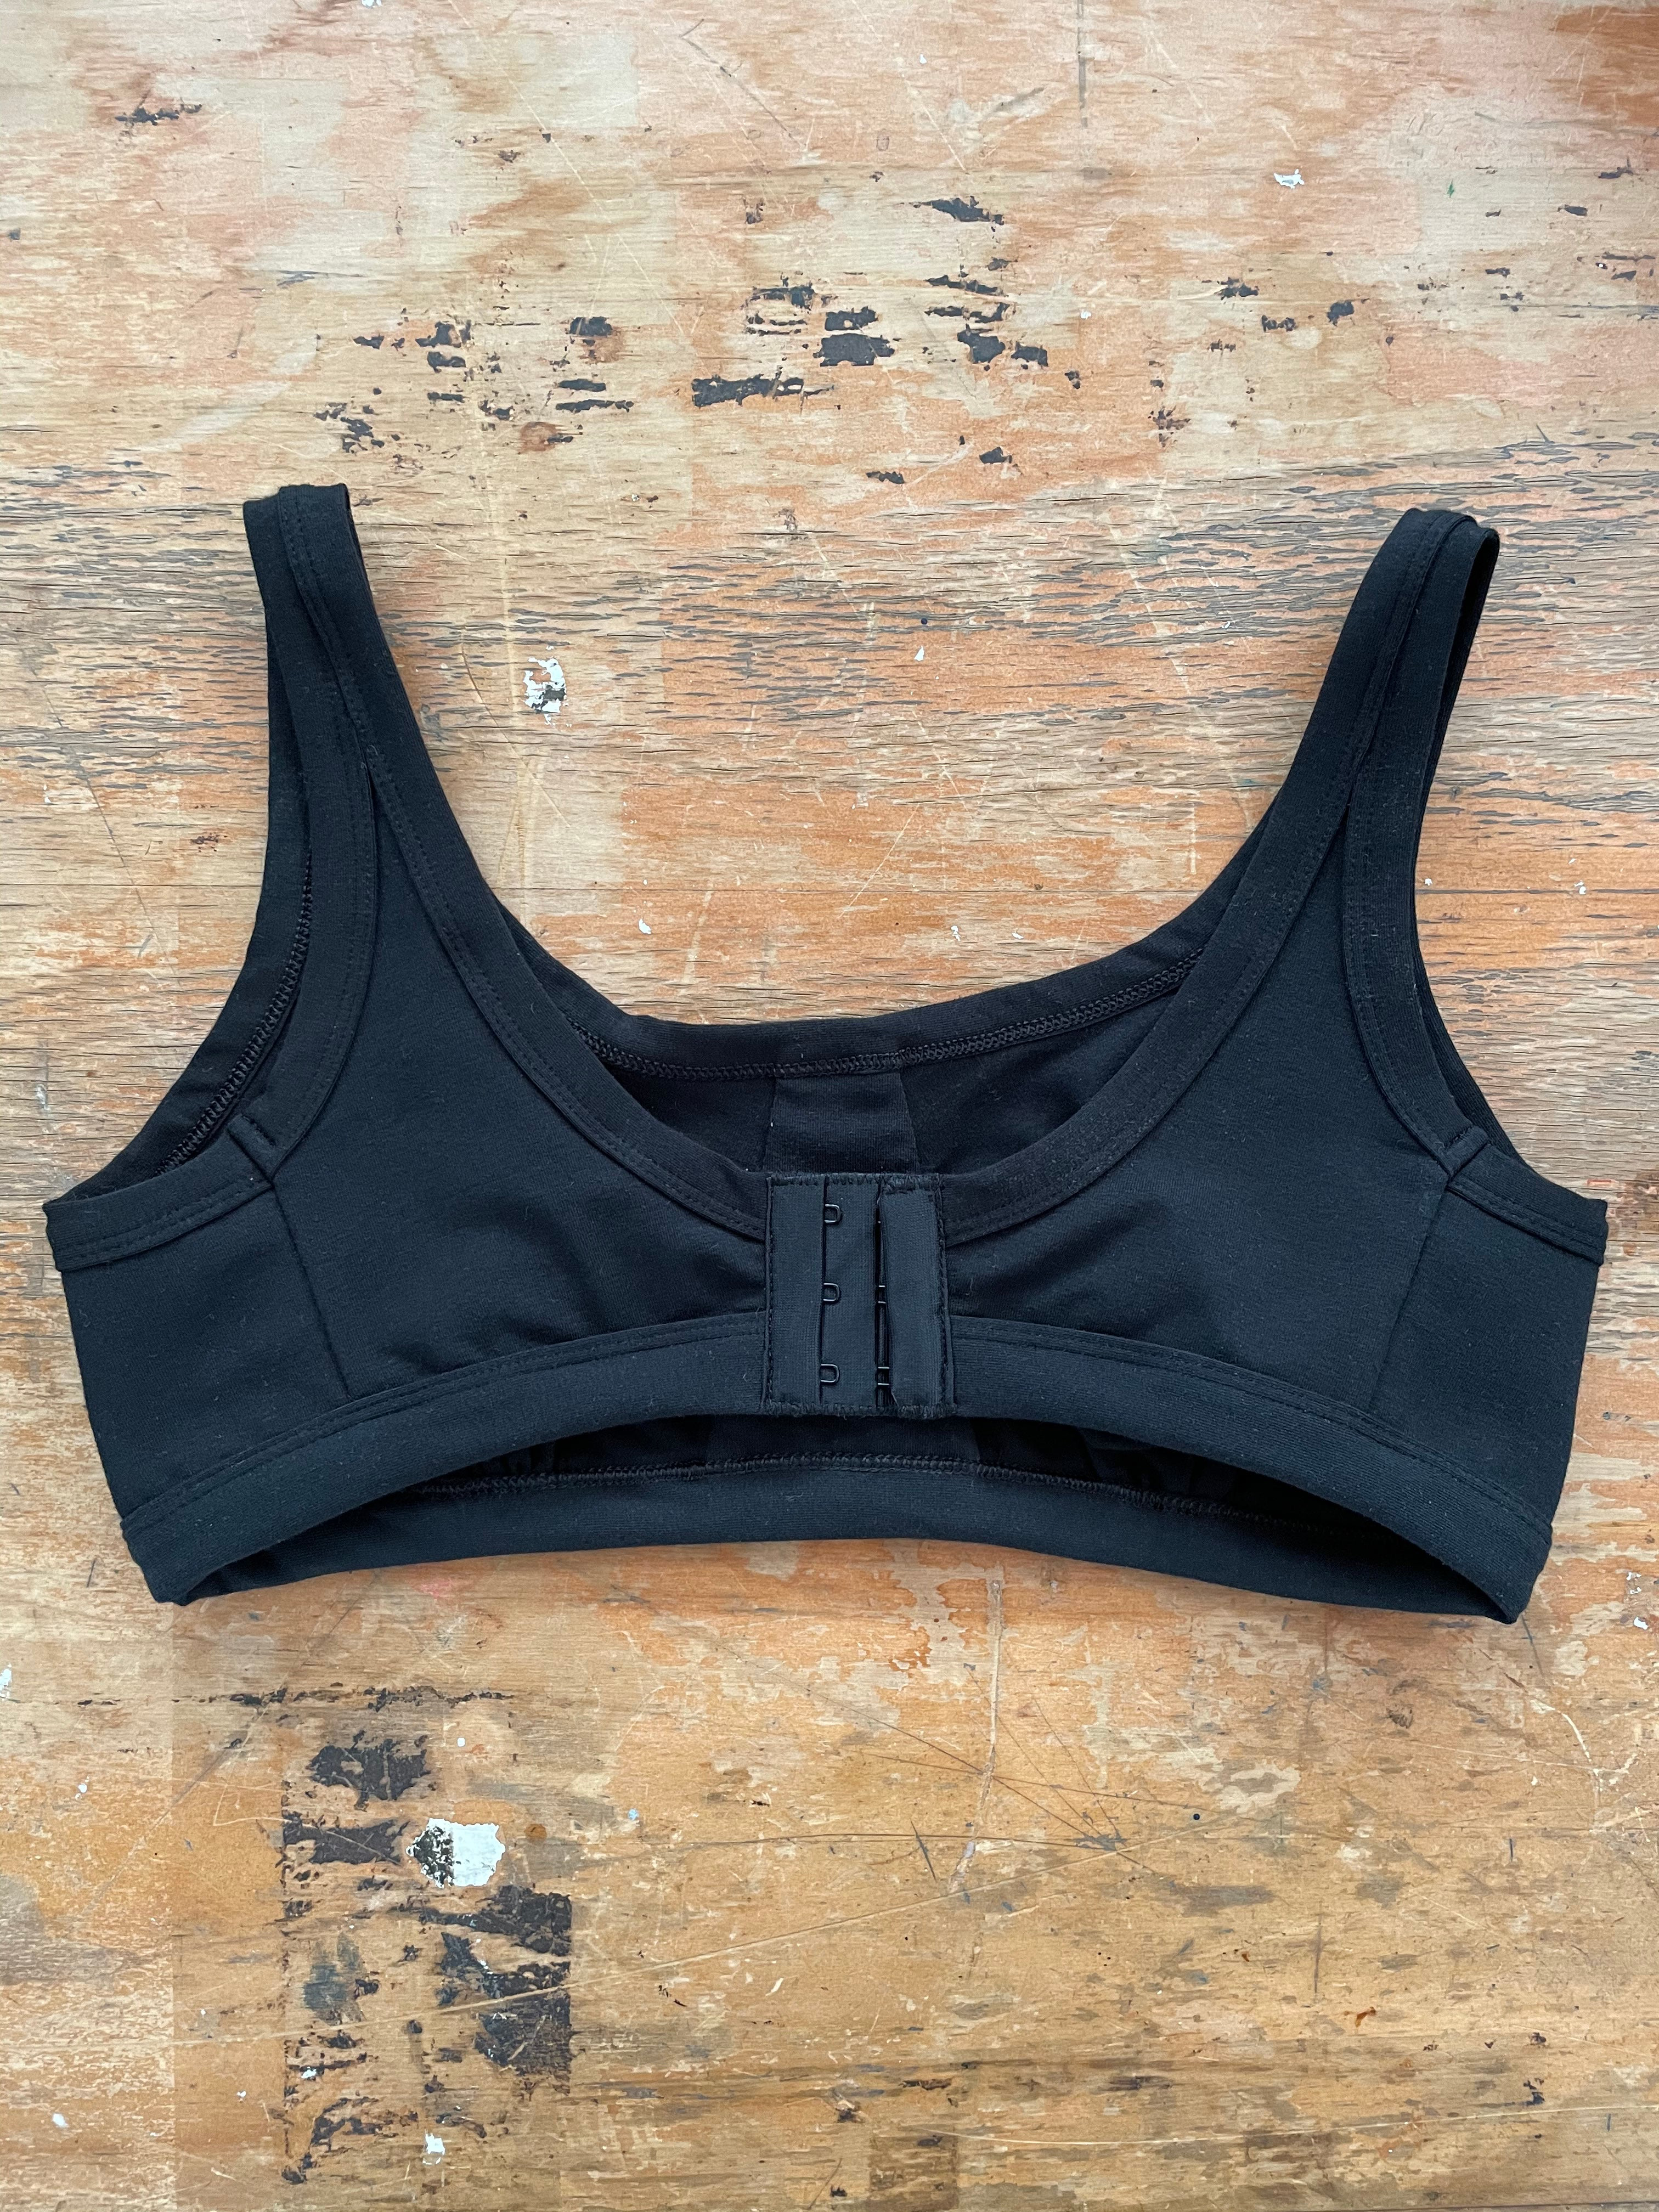 Bra Crop laid flat on table showing back fastening